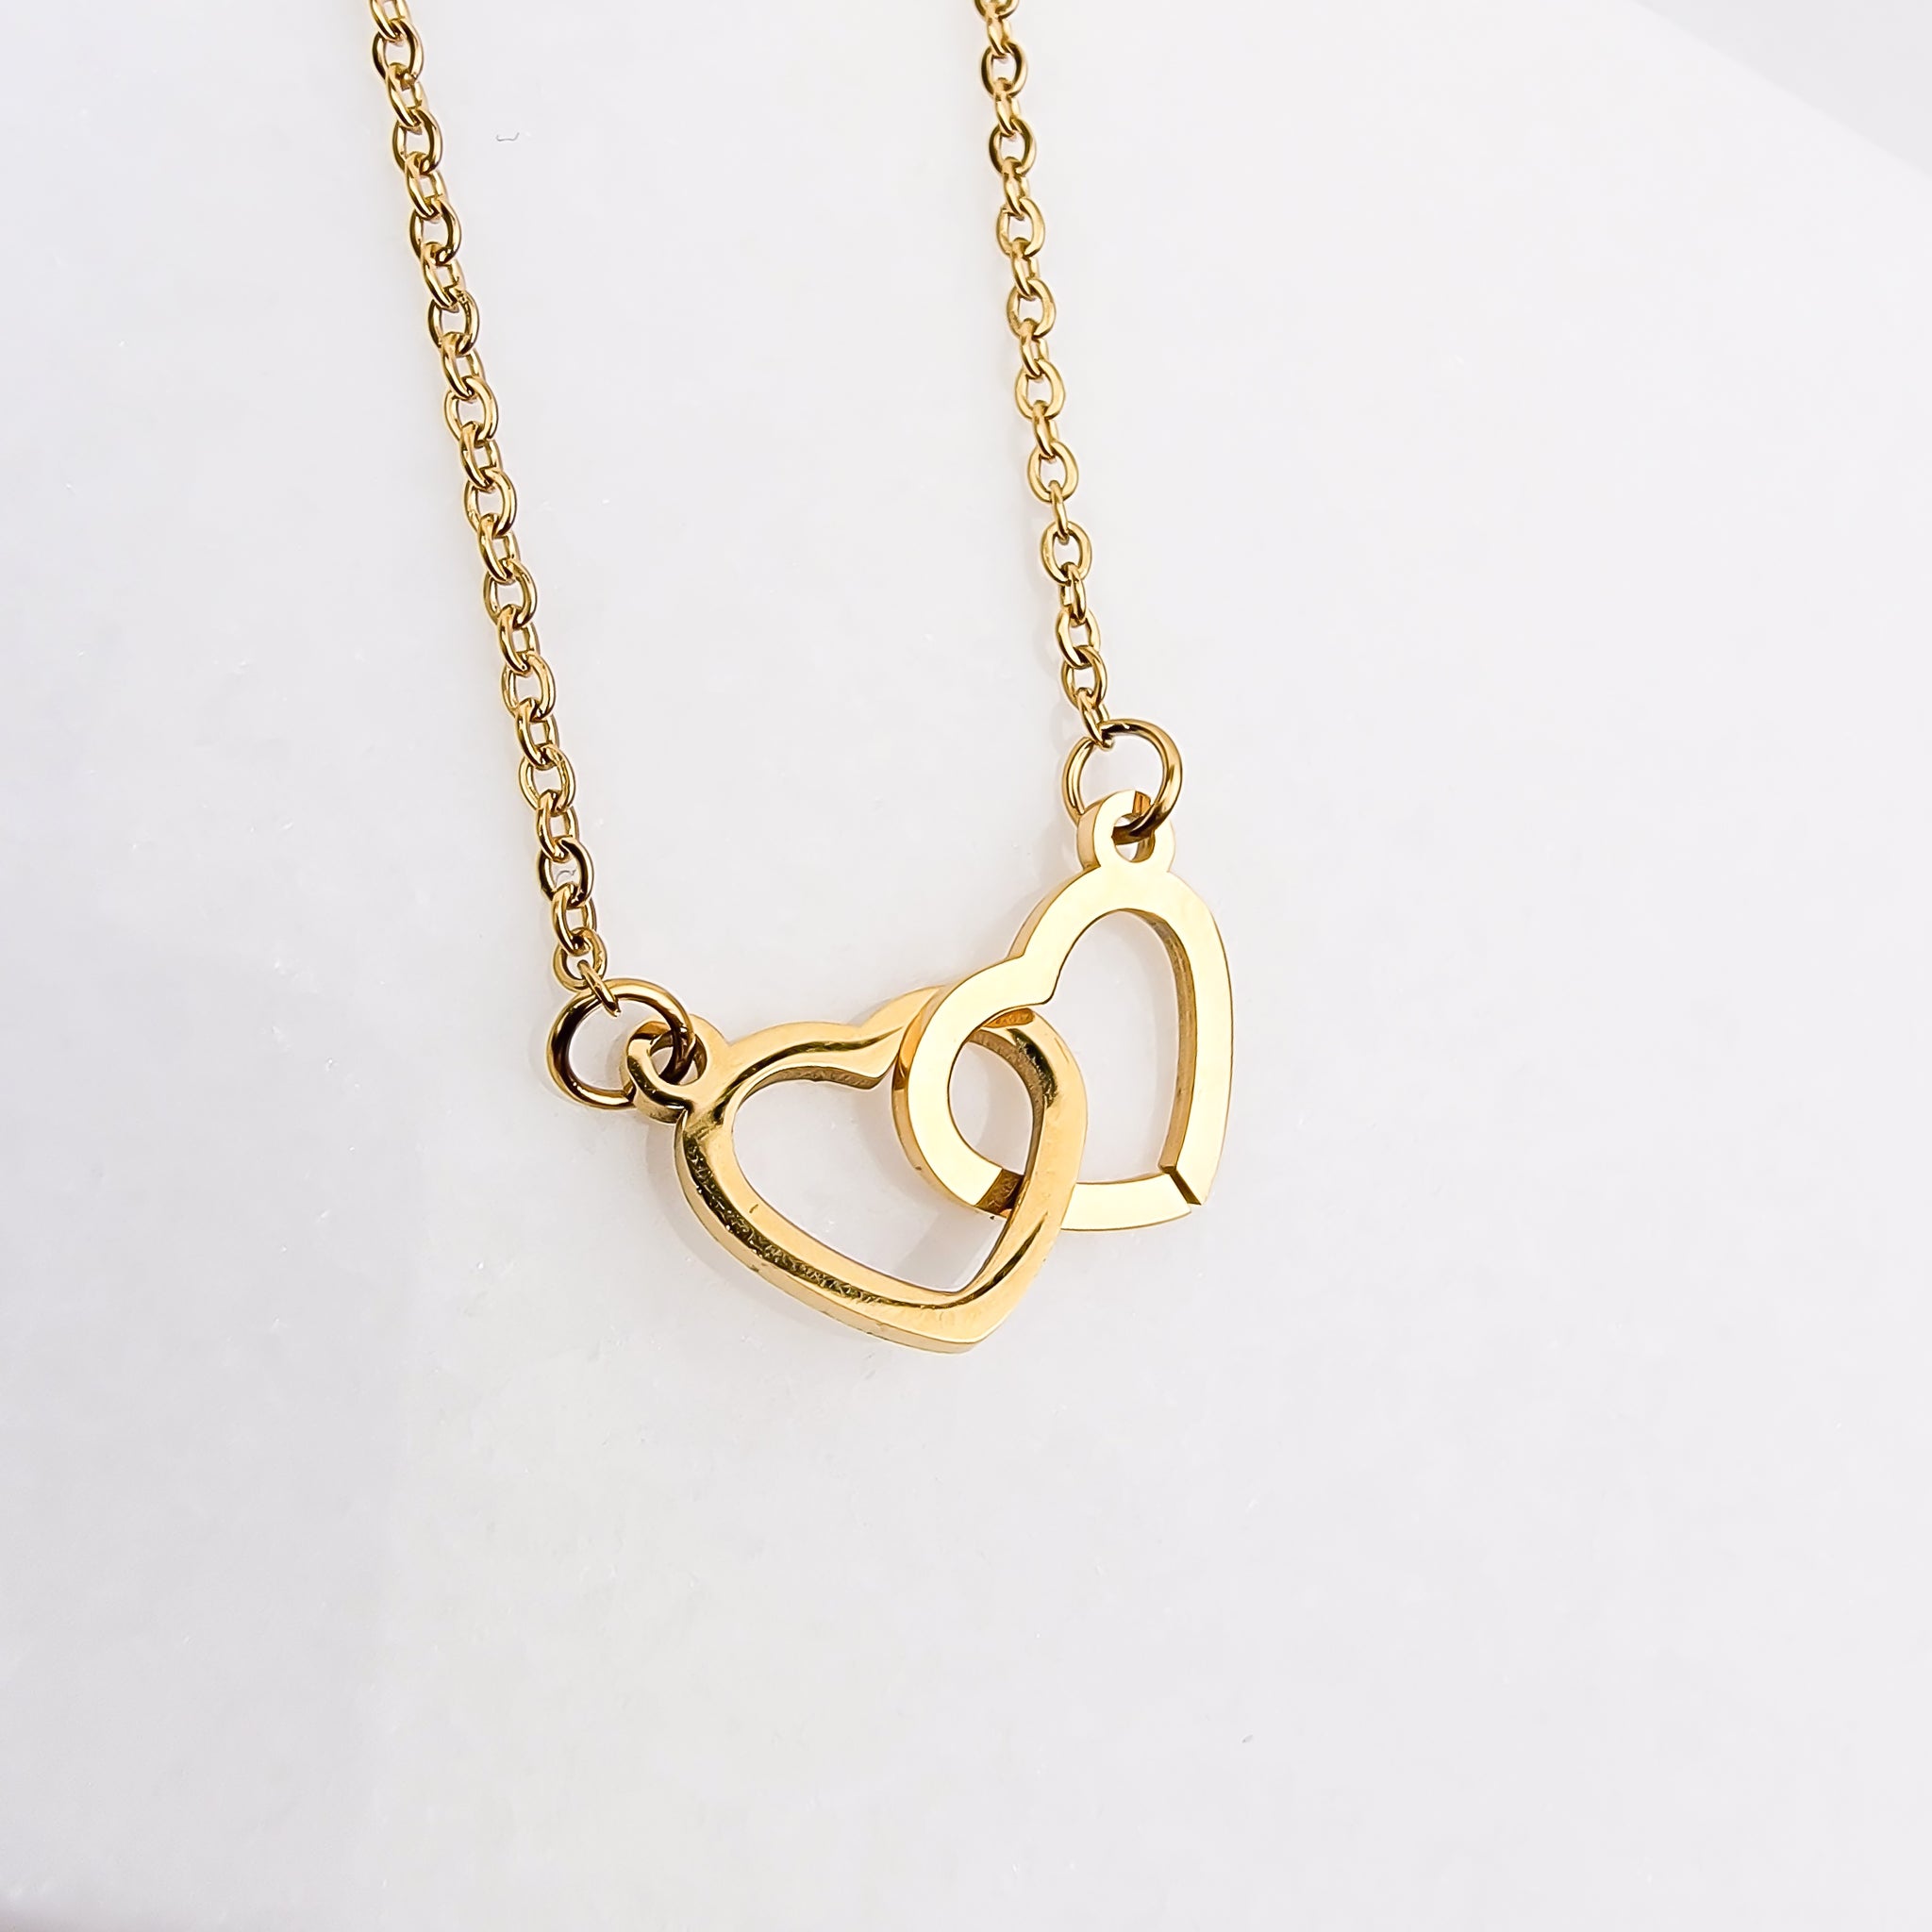 Interlinked Rings Pendant Necklace - New Arrivals